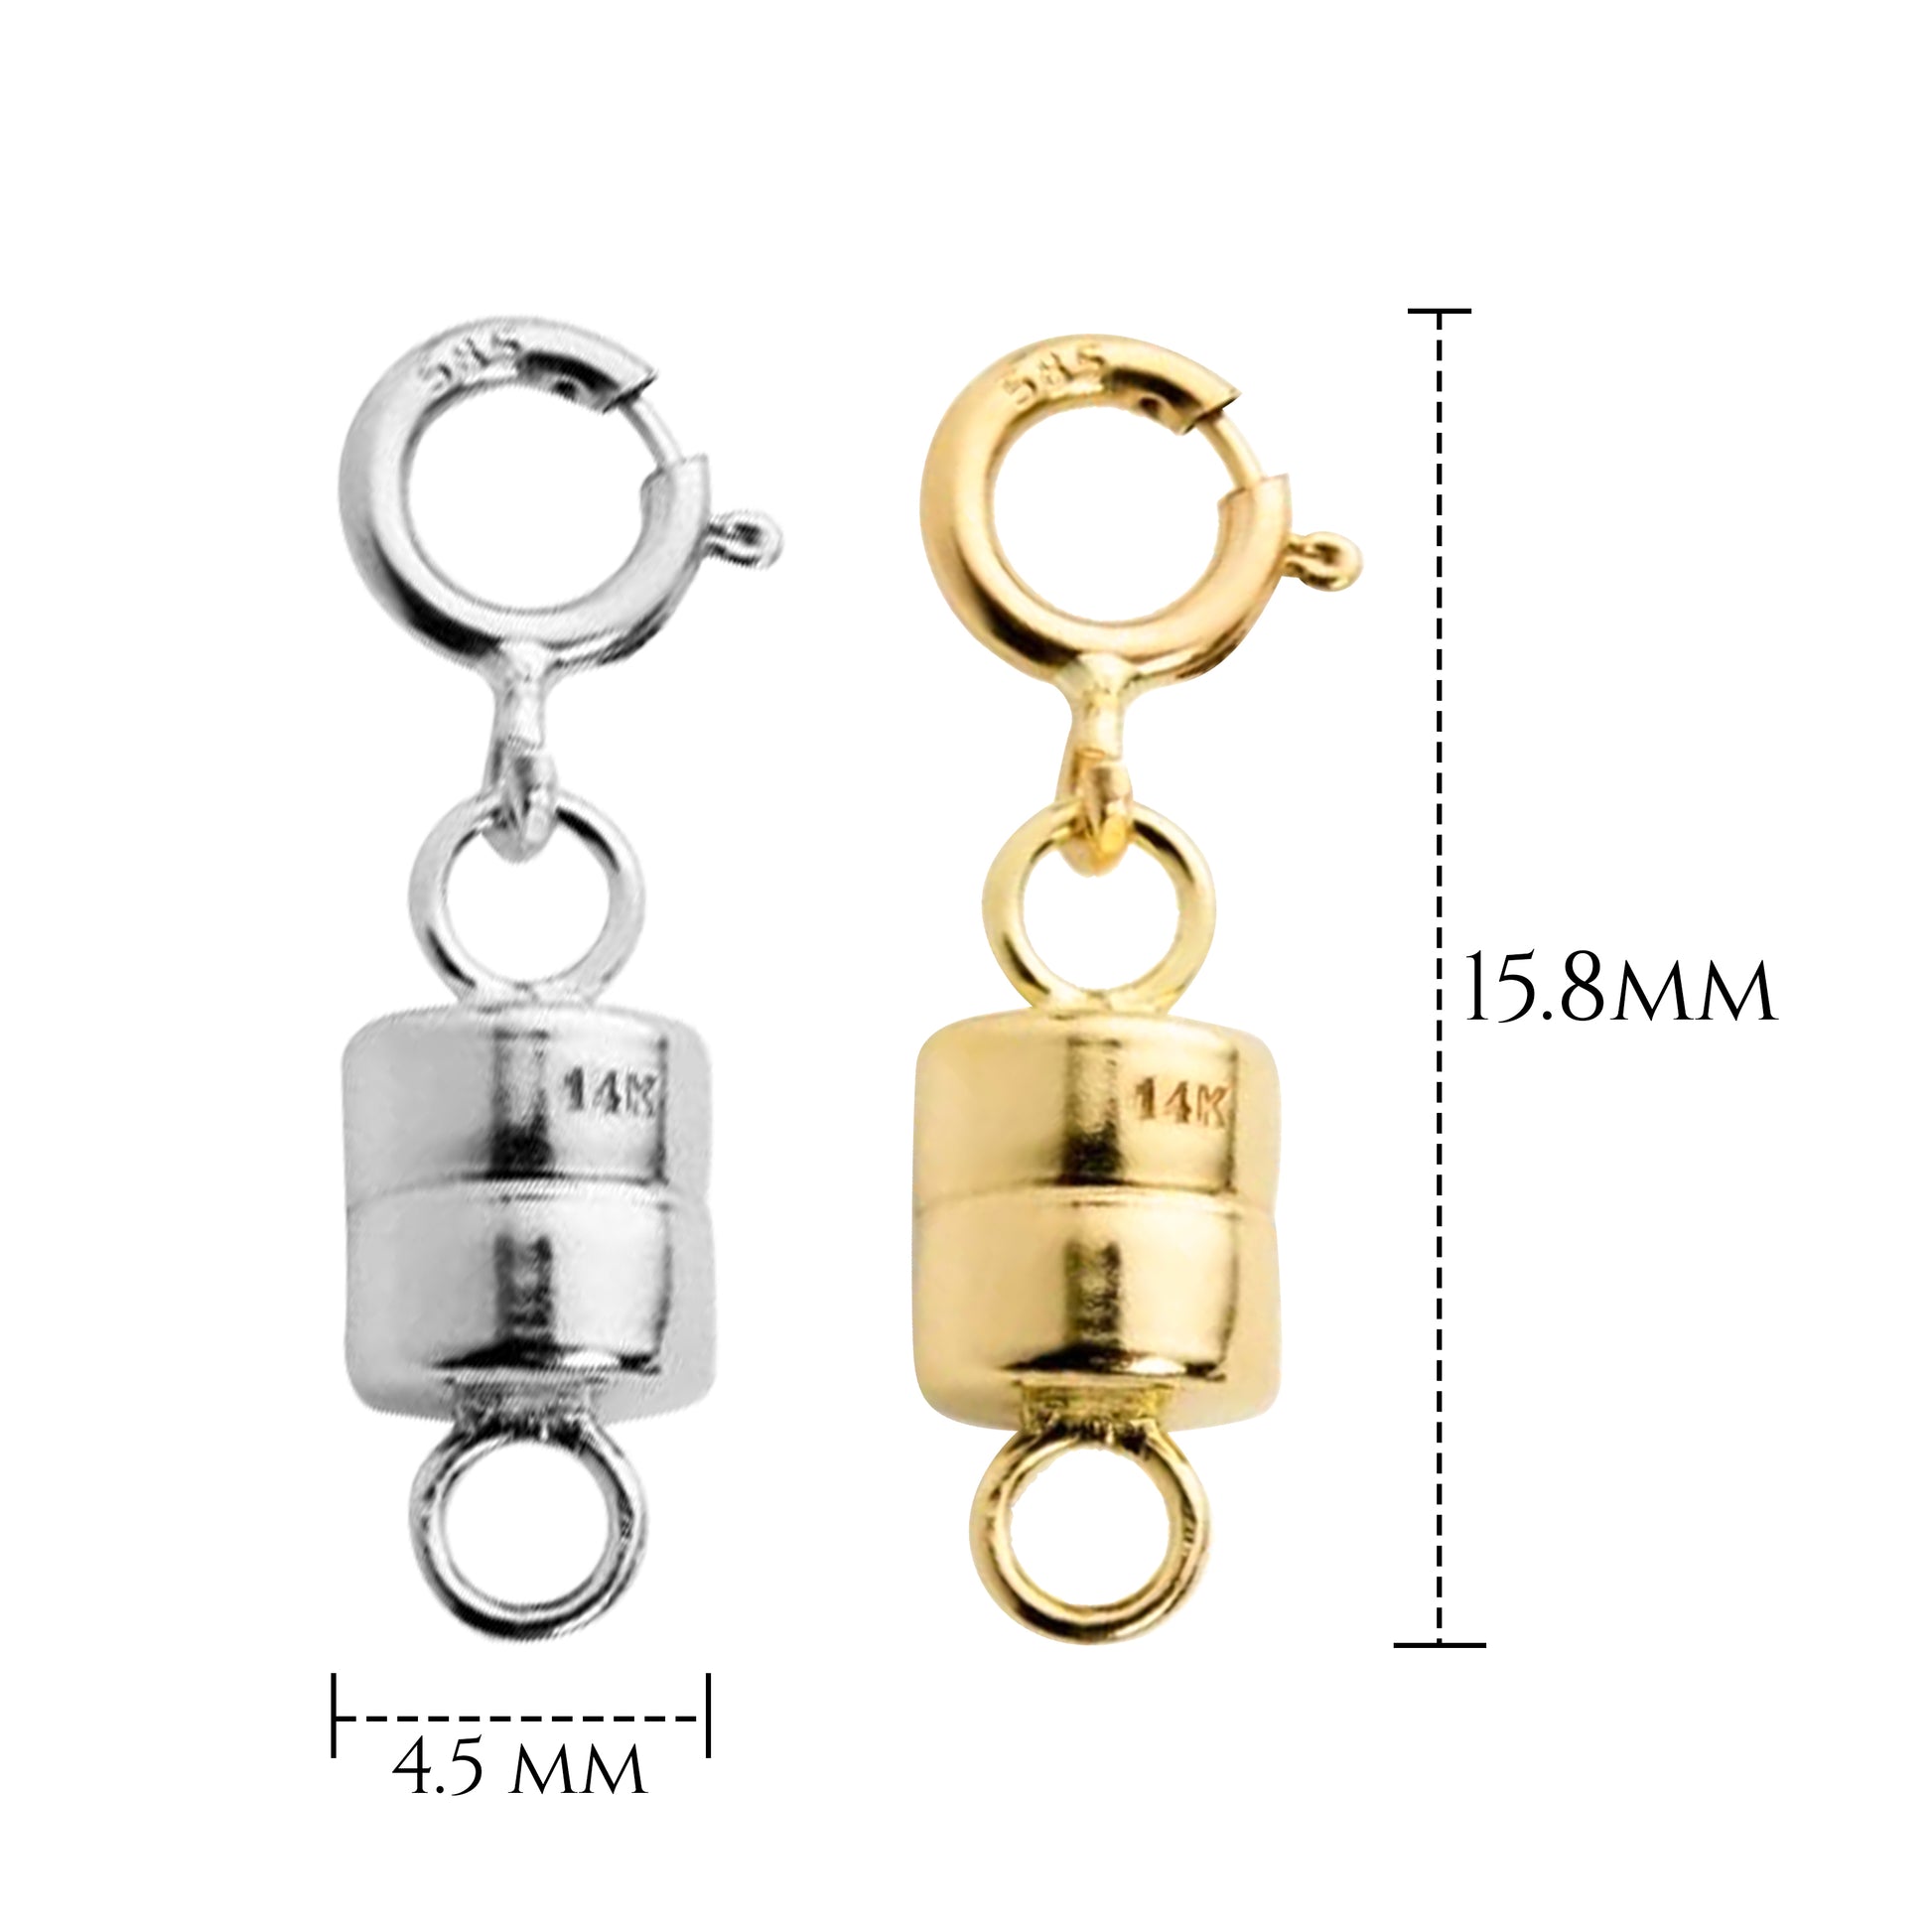 Magnetic Jewelry Clasps S/2 - Gold